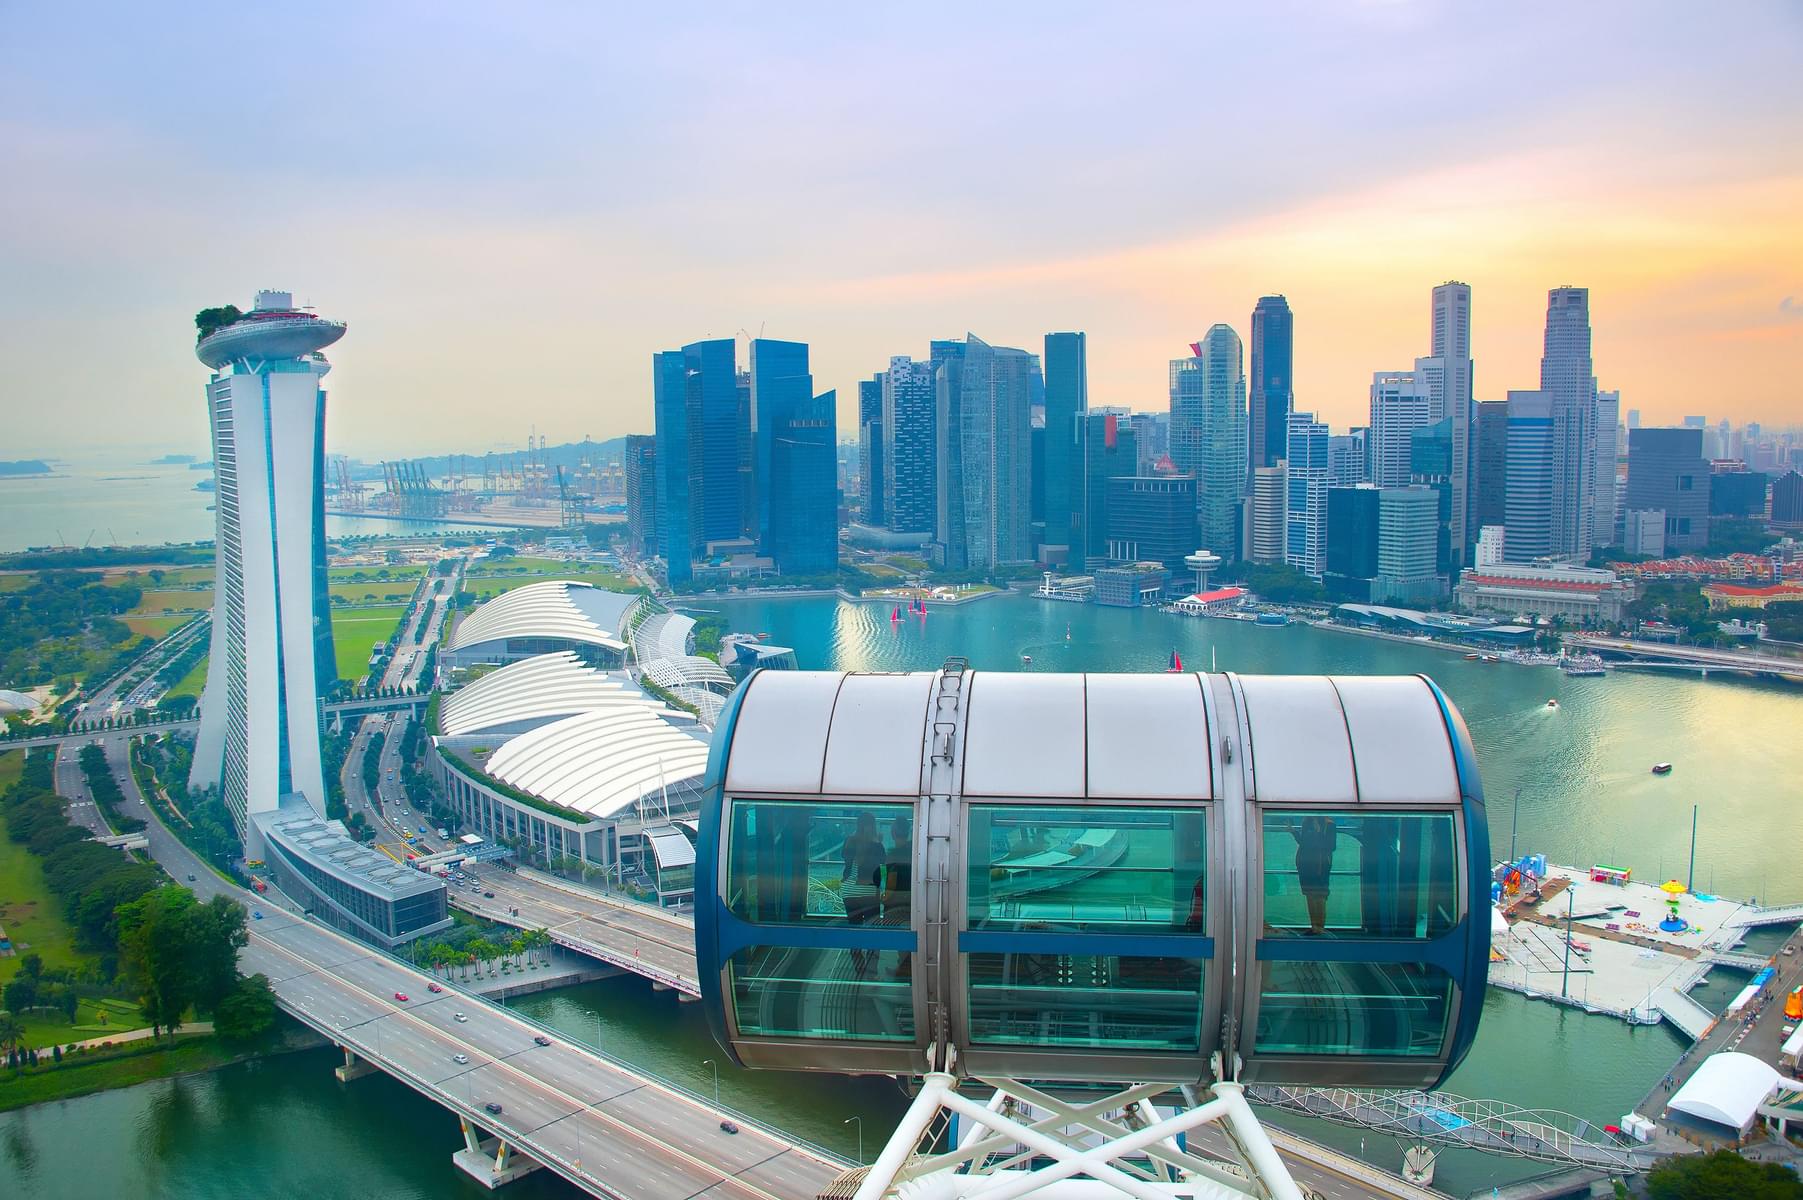 Experience Being on top of the world in Singapore Flyer